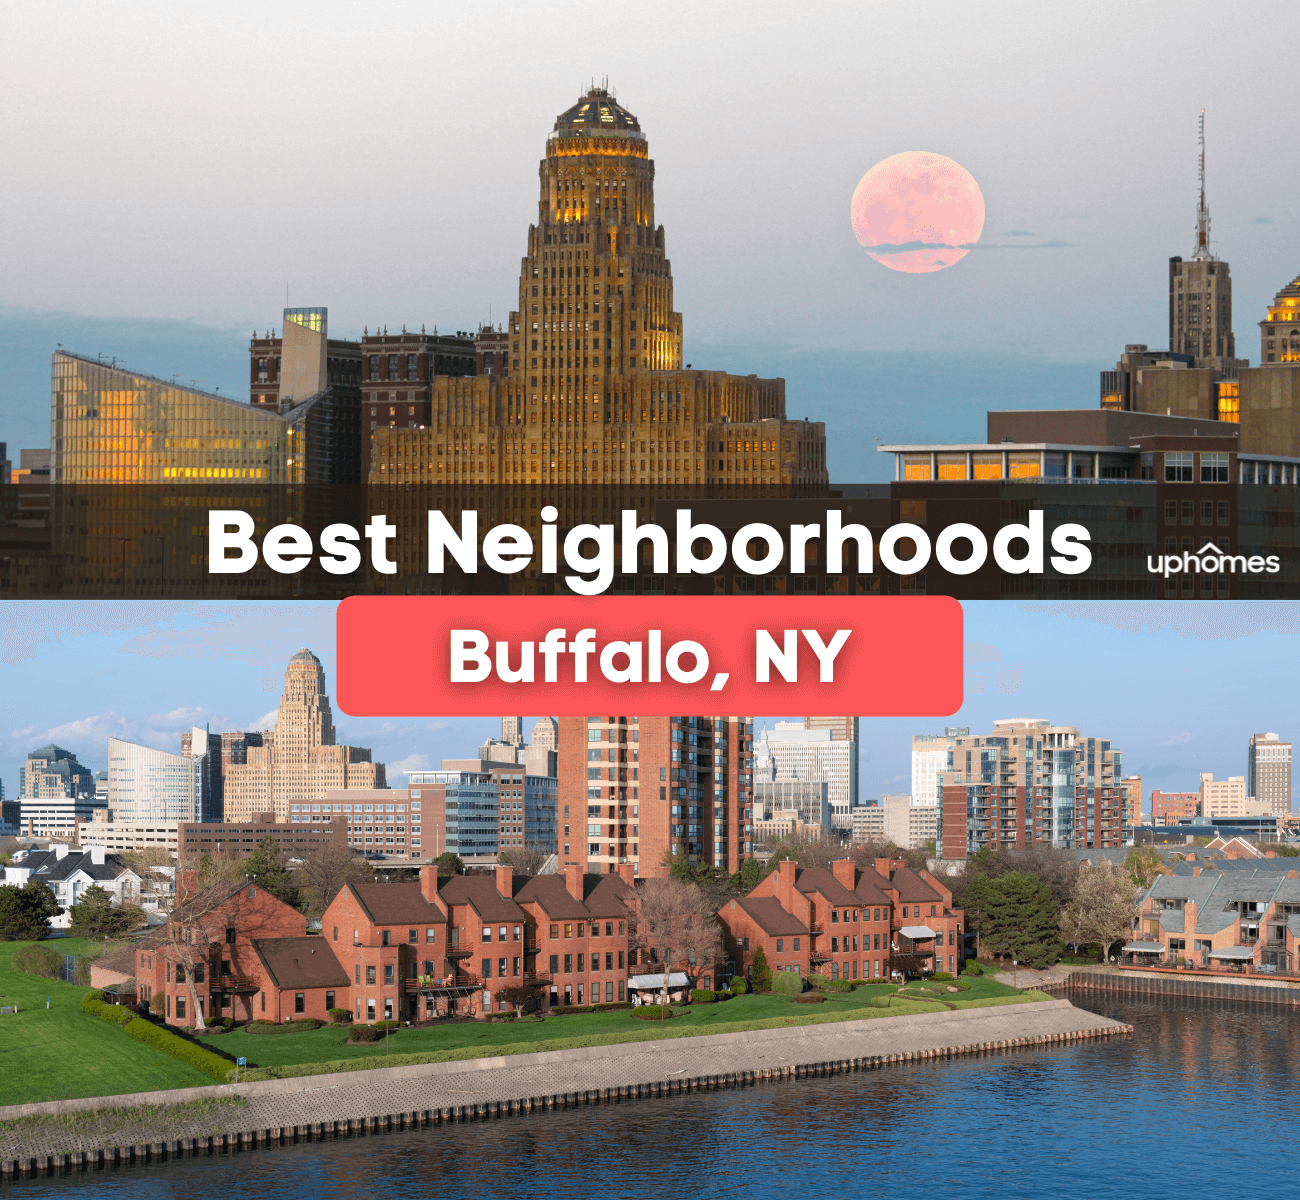 Best Neighborhoods in Buffalo, NY - What are the best places to live in Buffalo New York?